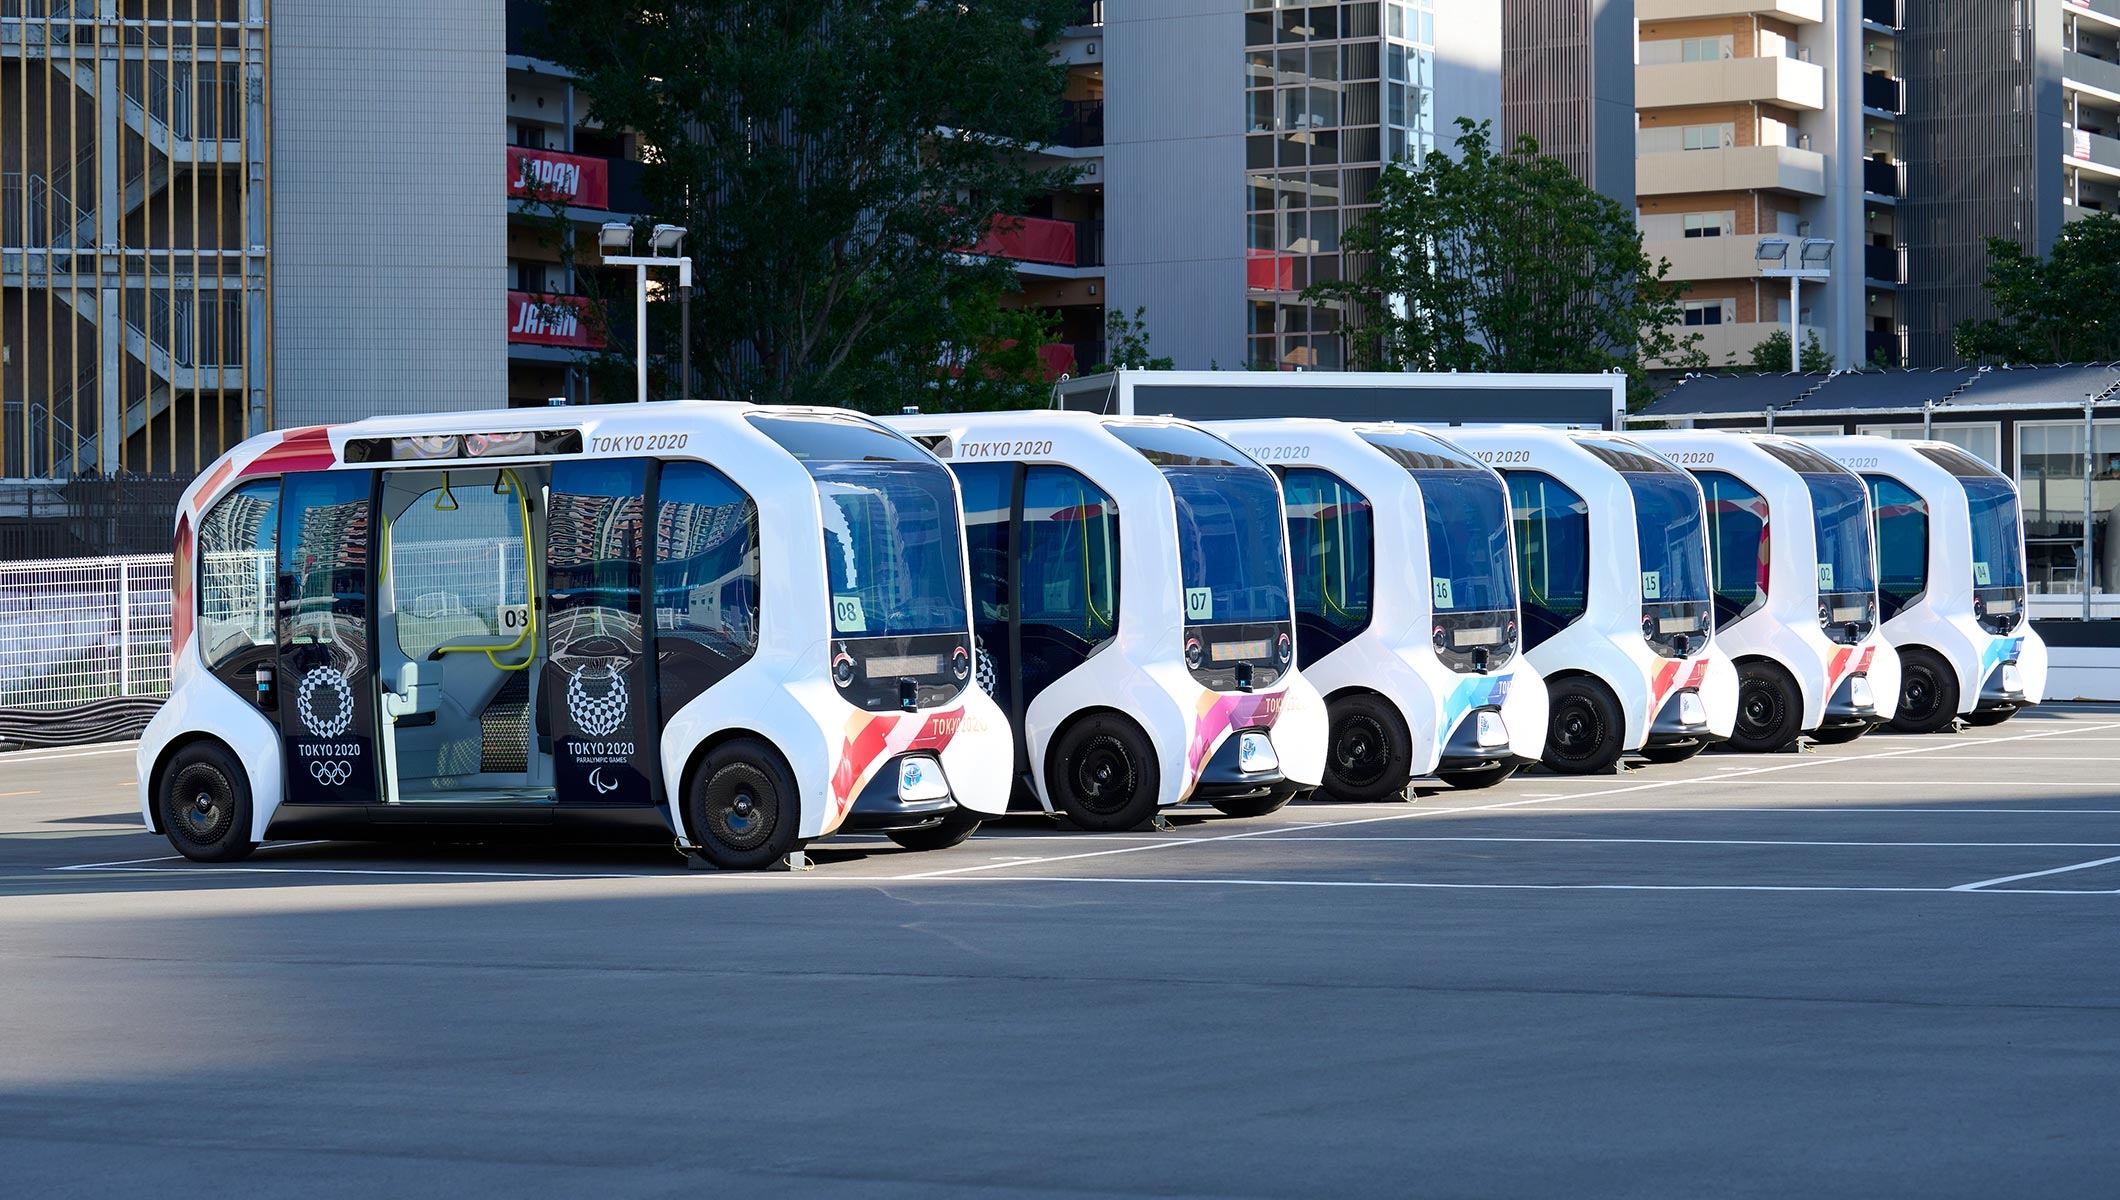 Fleet of Toyota e-Palette vehicles at Tokyo 2020 Olympic Village